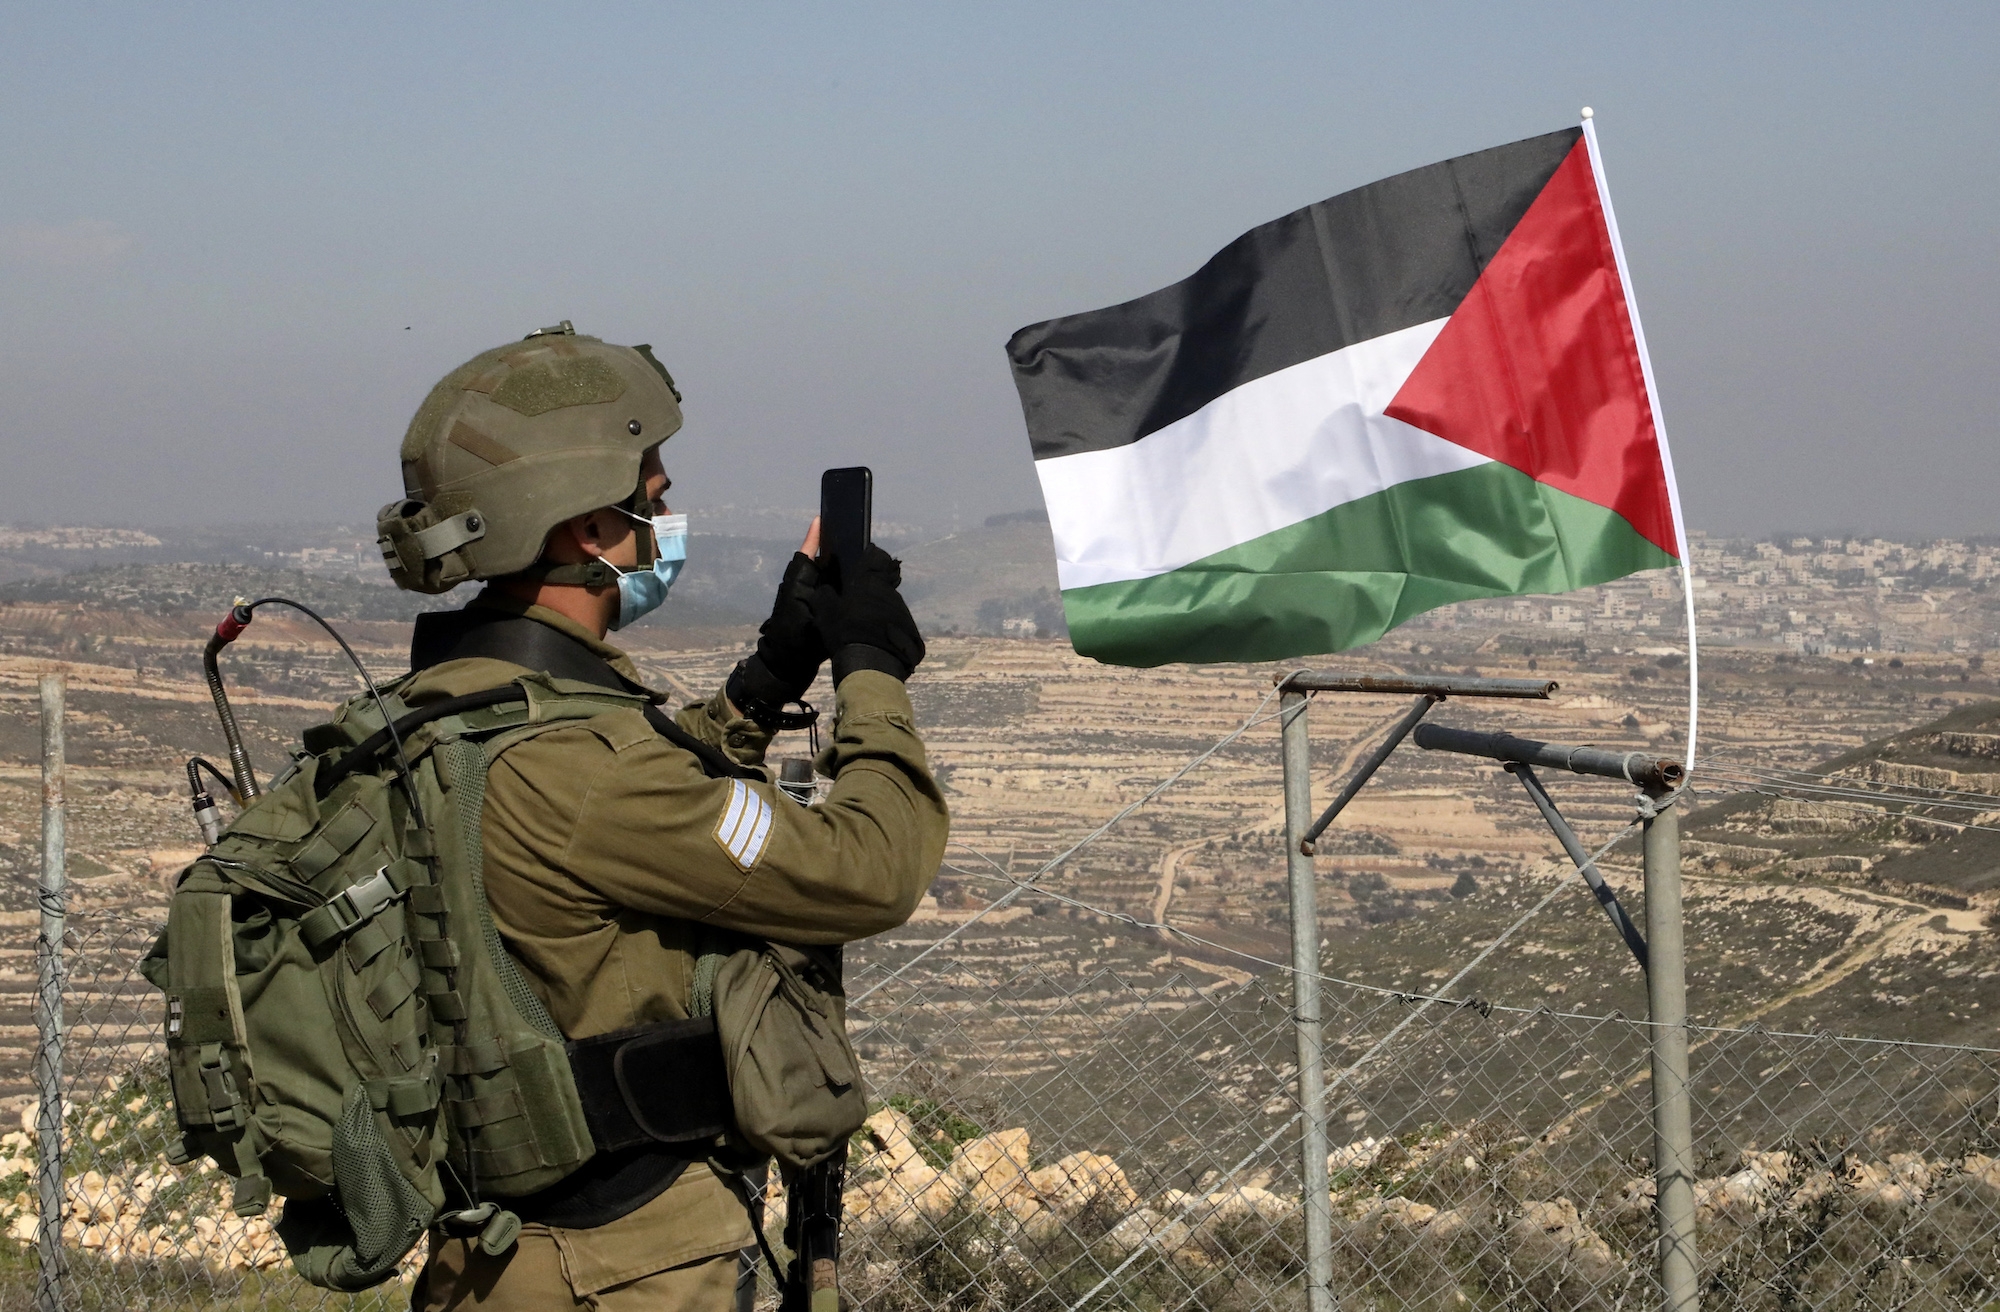 Israeli soldier stands near Palestinian flag in West Bank AFP